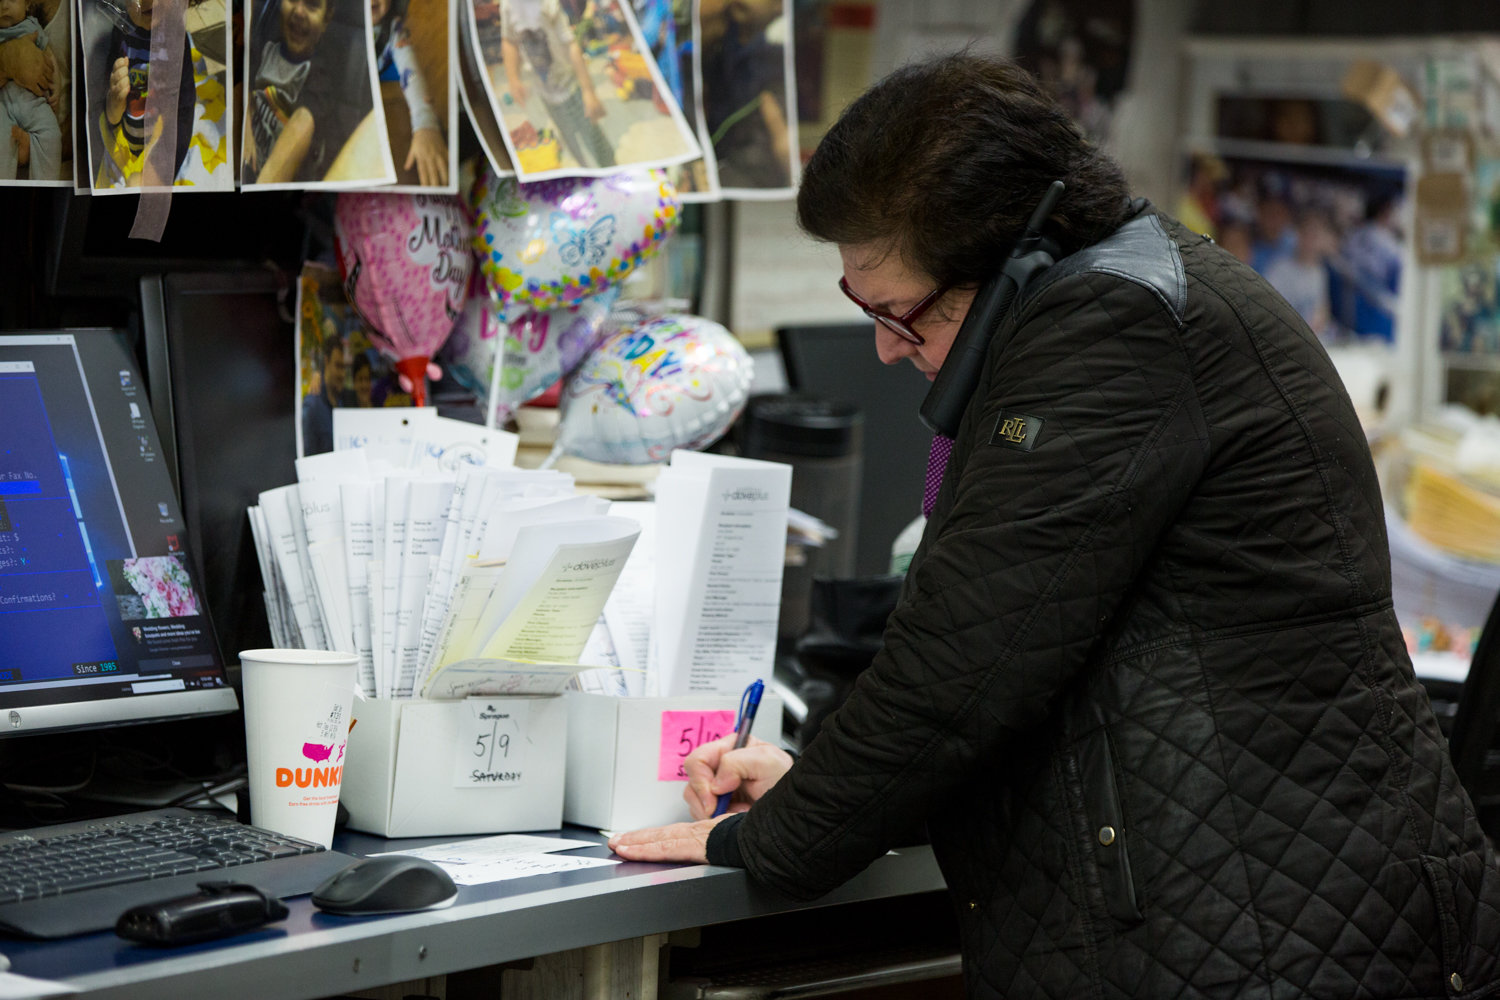 Columbia Florist co-owner Connie Dennis takes a customer’s order over the phone in the days leading up to Mother’s Day. The Kingsbridge floral mainstay has managed to stay open despite the statewide coronavirus shutdown.